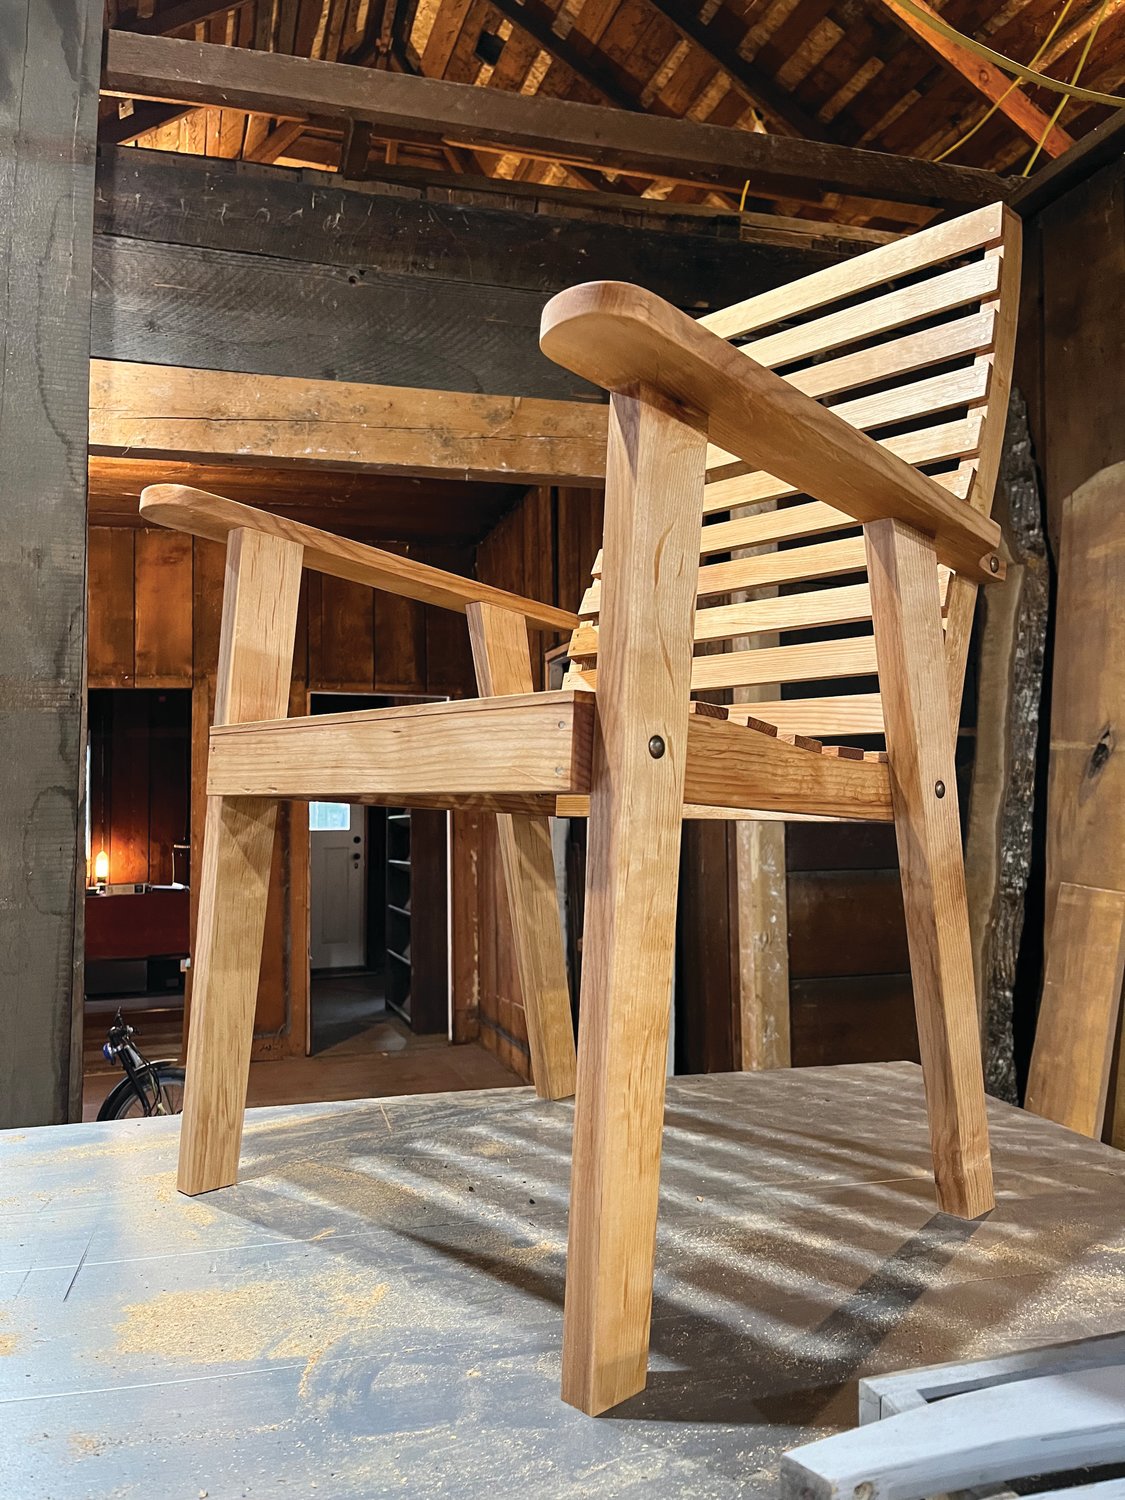 Local woodworker Paul Pearce will be displaying his lightweight porch chair — built with lumber from the red alder tree from Valley View Forest — in this year’s Woodworkers Show.